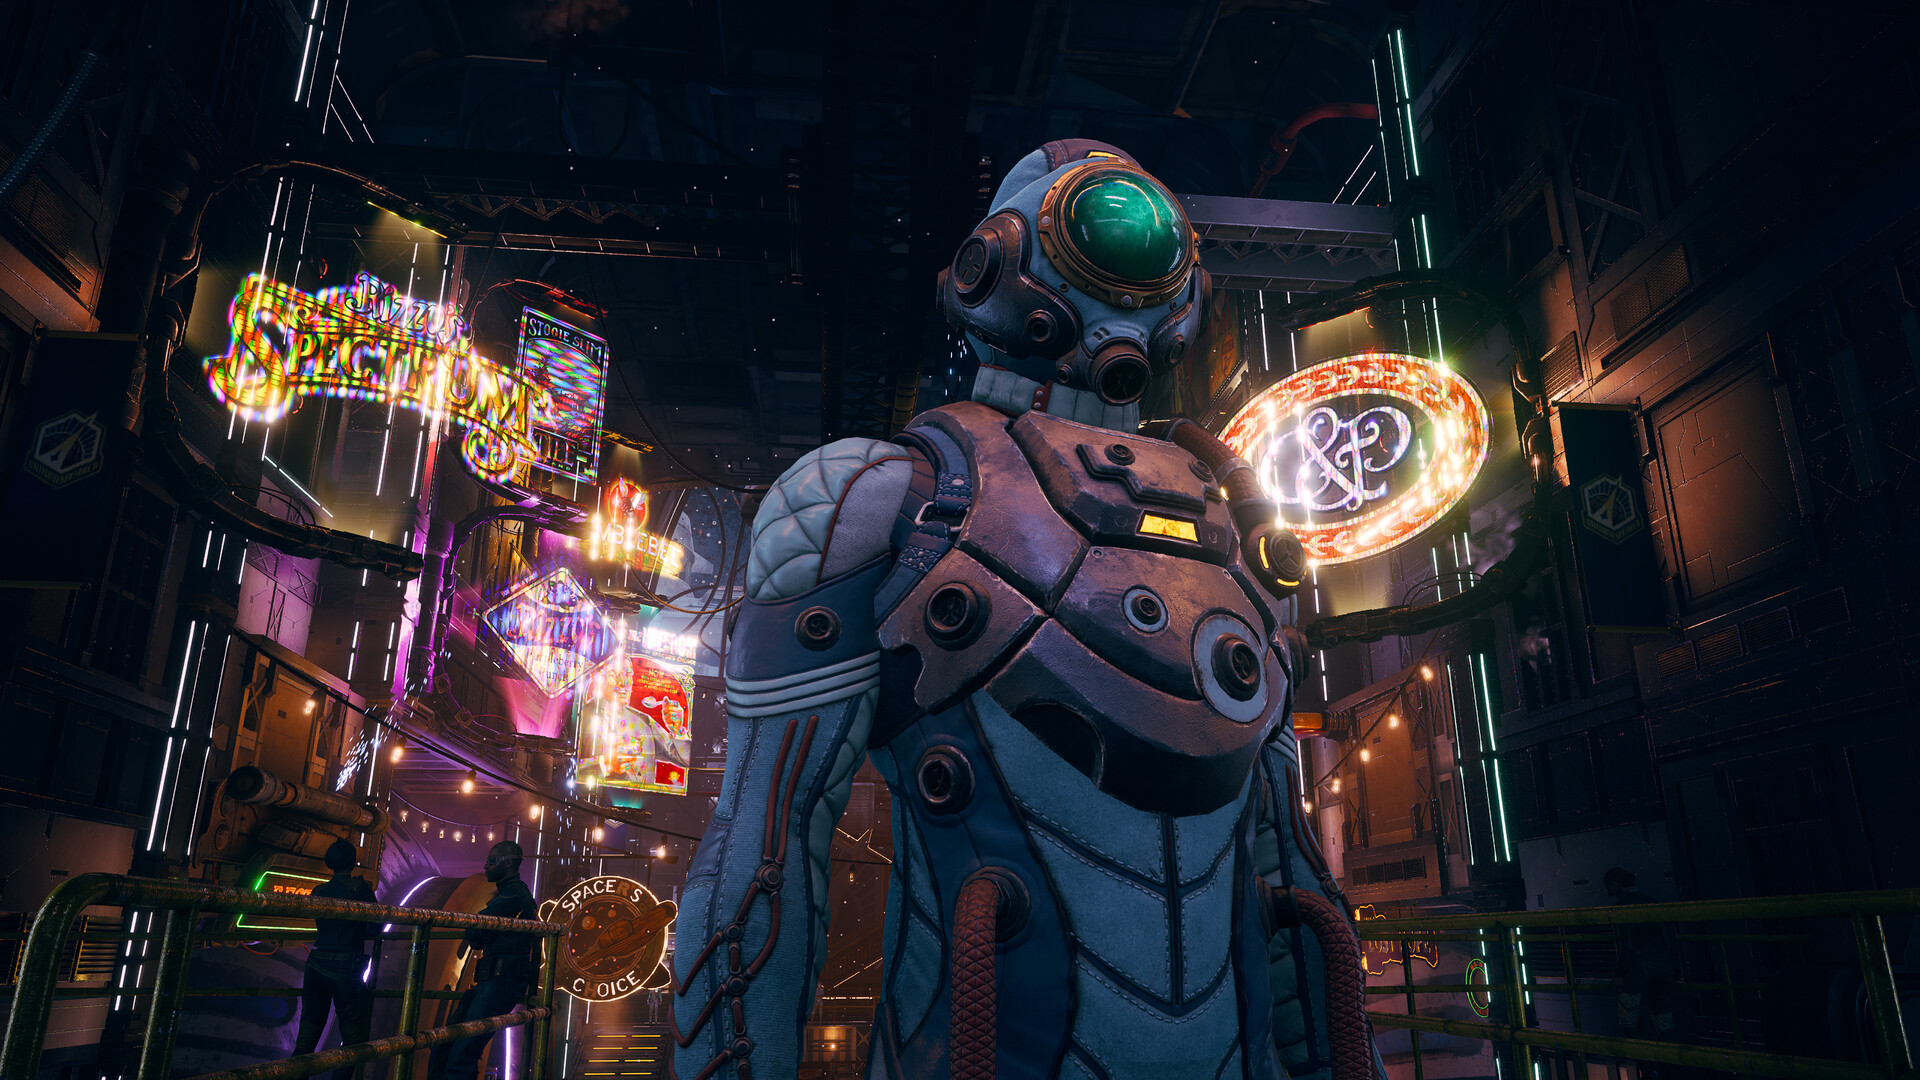 Review — The Outer Worlds: Spacer's Choice Edition, by Stims